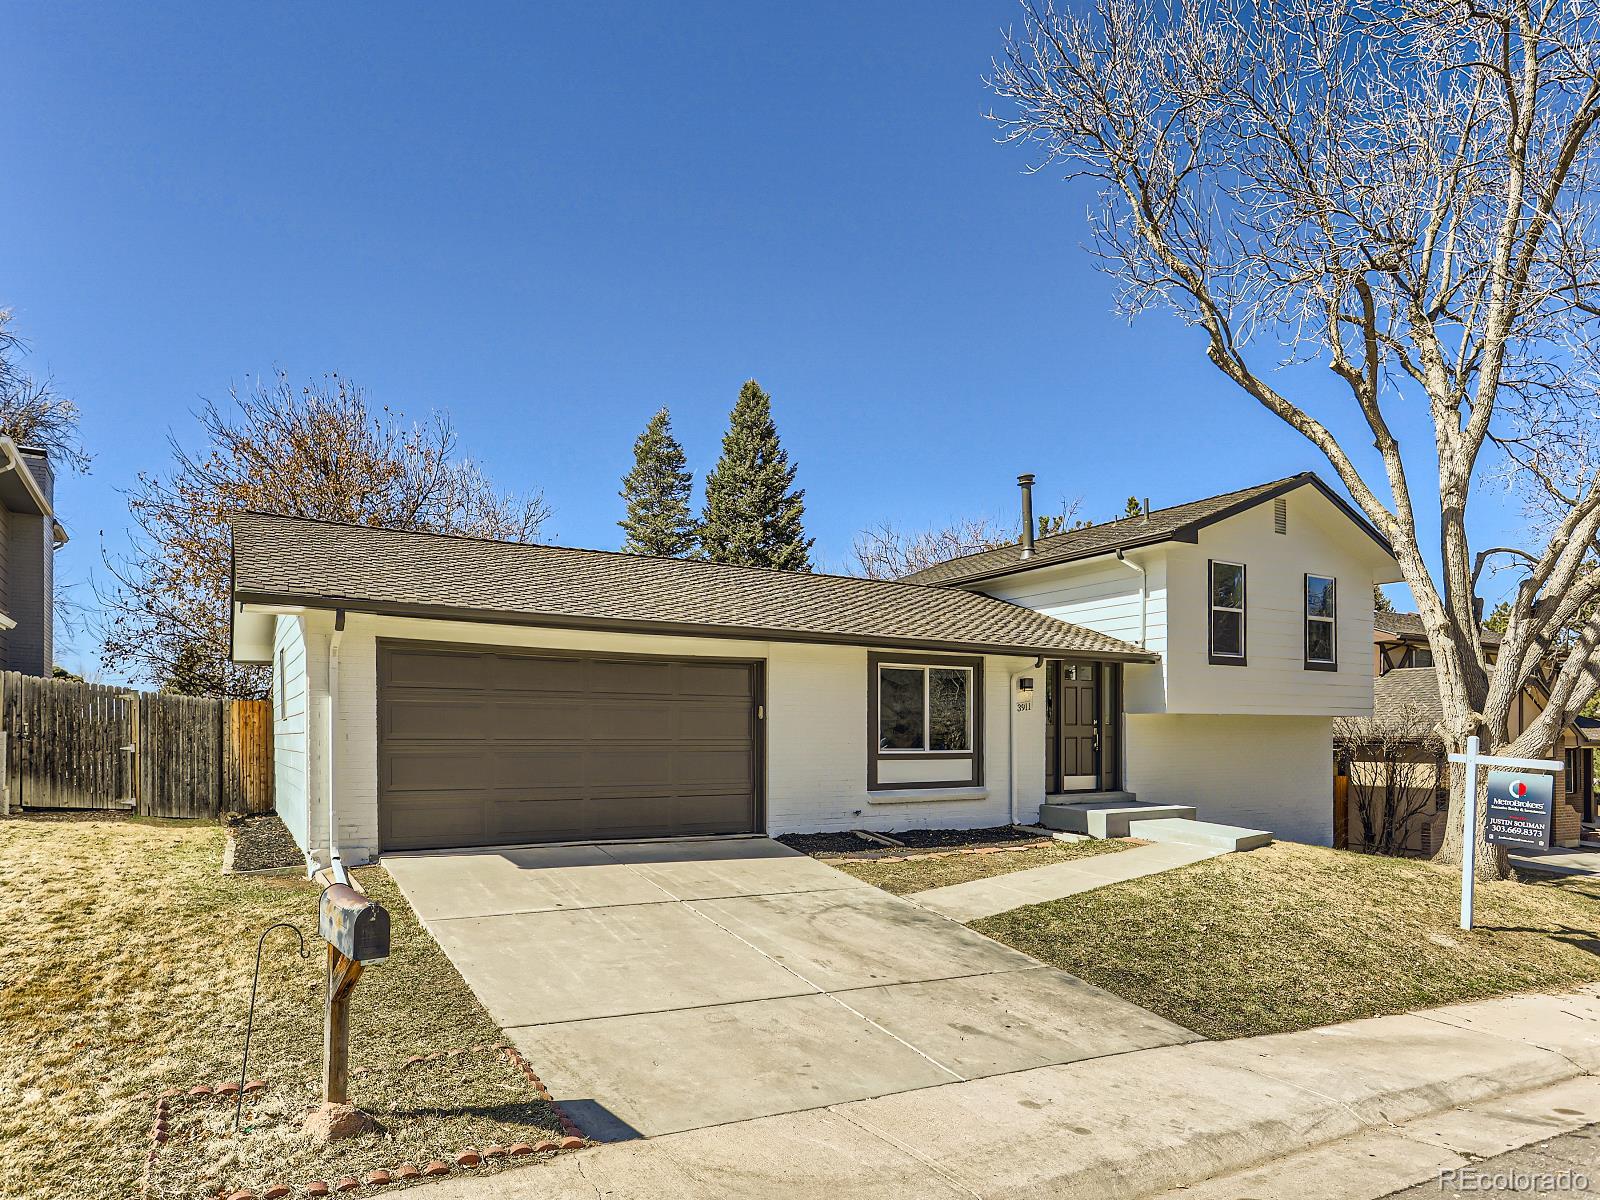 3911 s wisteria court, denver sold home. Closed on 2024-03-29 for $745,000.